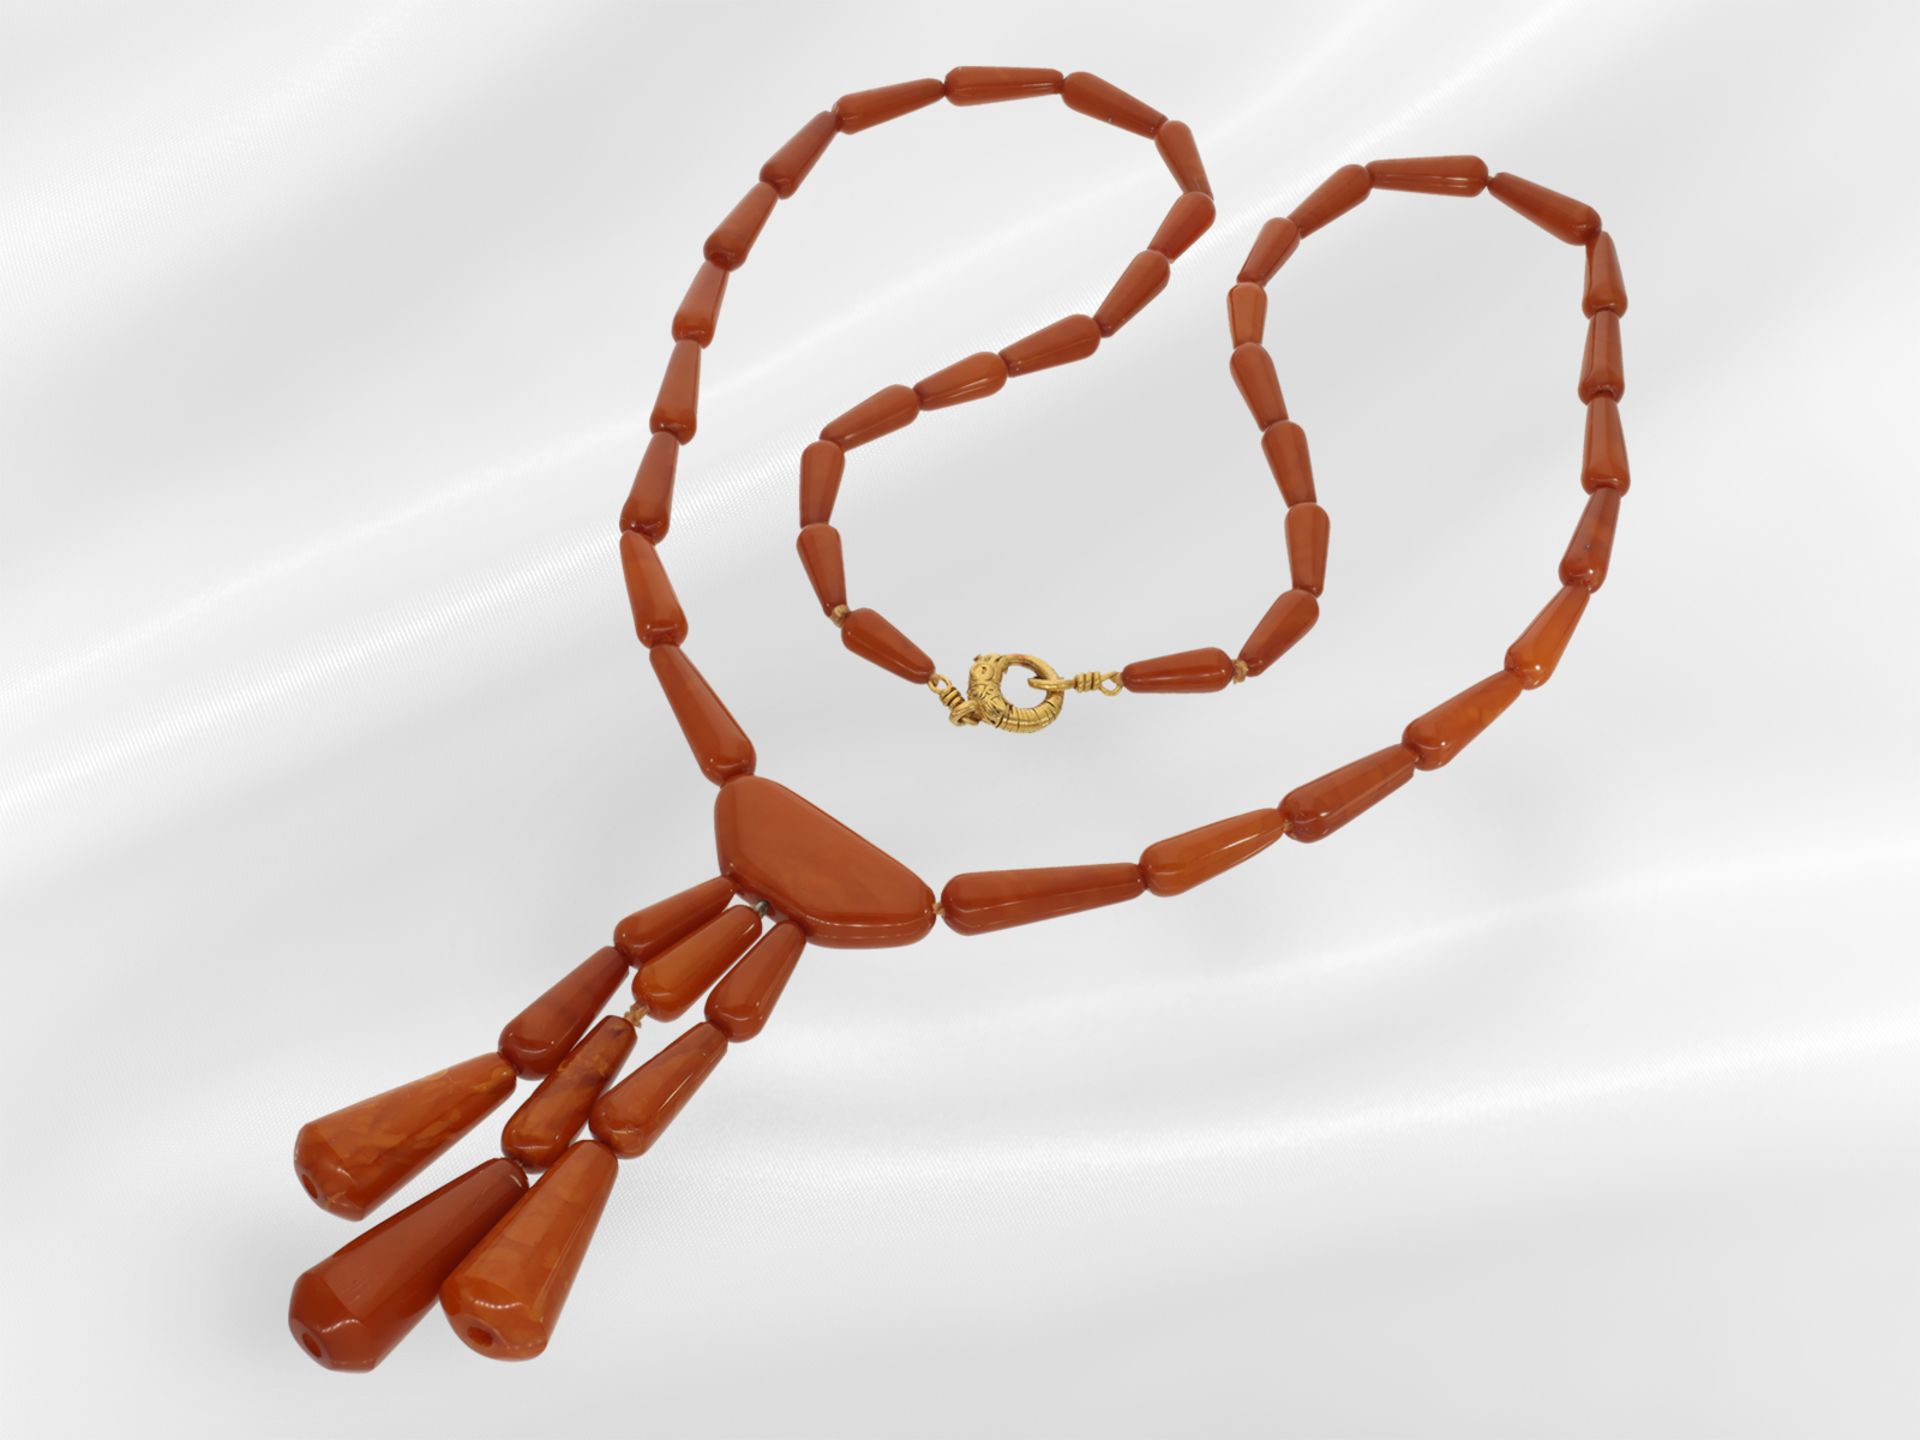 Necklace: extremely rare Art Deco amber necklace with brown butterscotch amber, ca. 1920 - Image 2 of 3